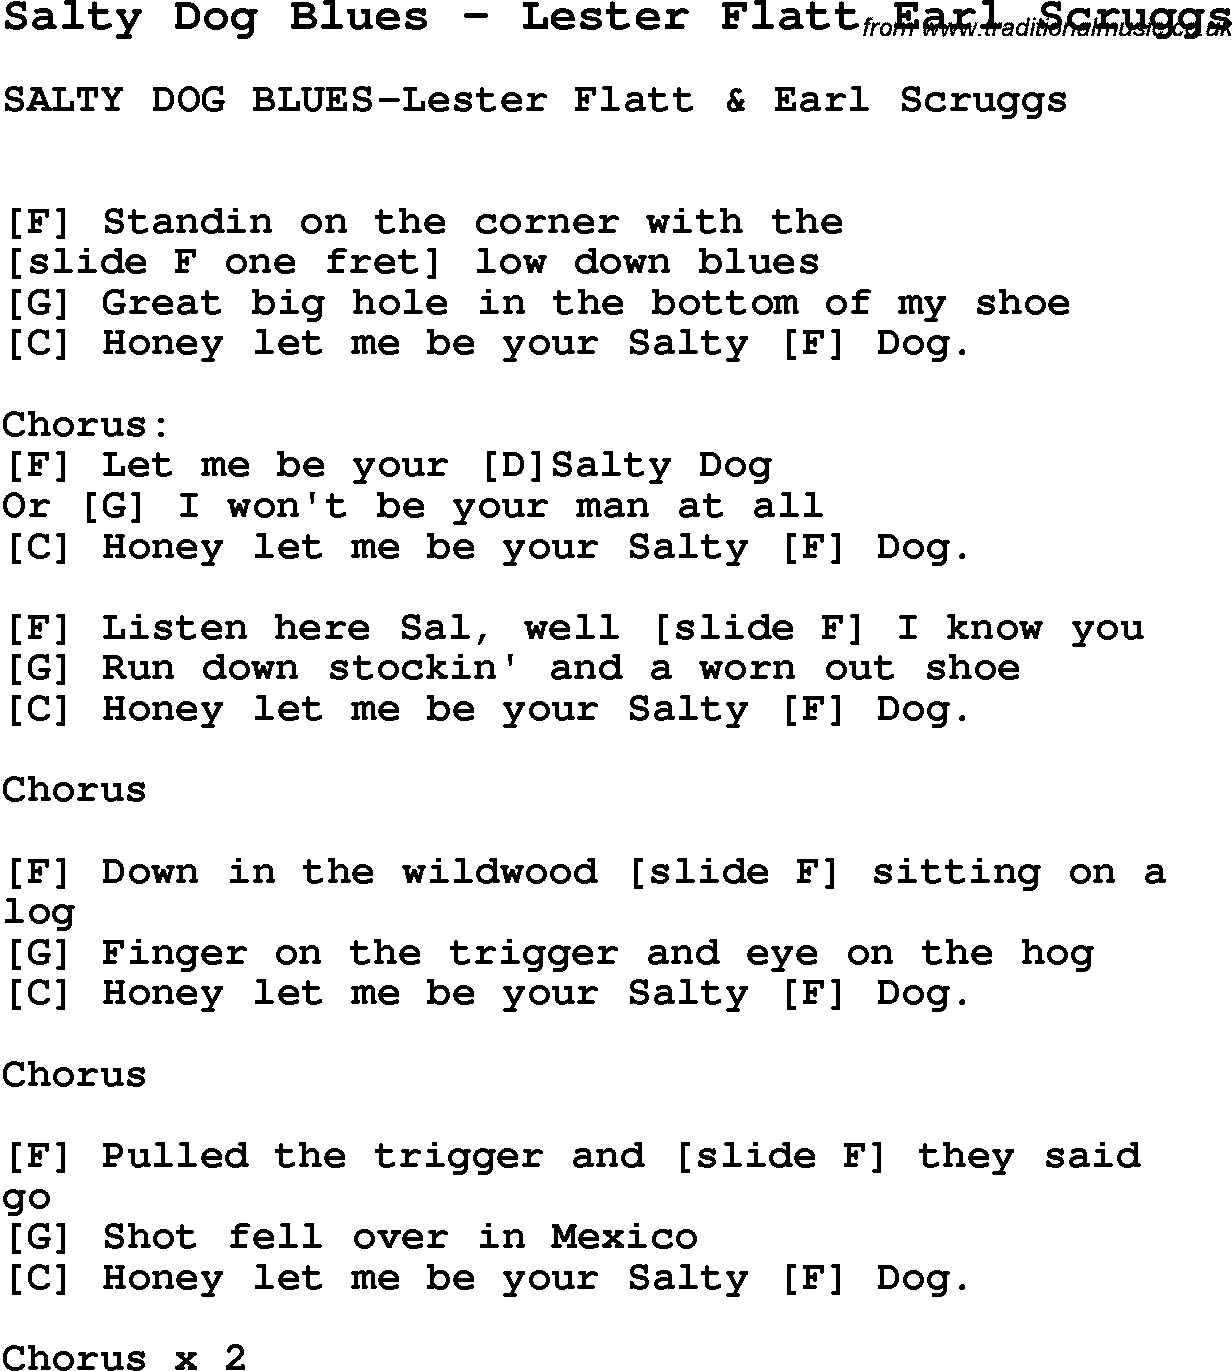 Song Salty Dog Blues by Lester Flatt Earl Scruggs, with lyrics for vocal performance and accompaniment chords for Ukulele, Guitar Banjo etc.